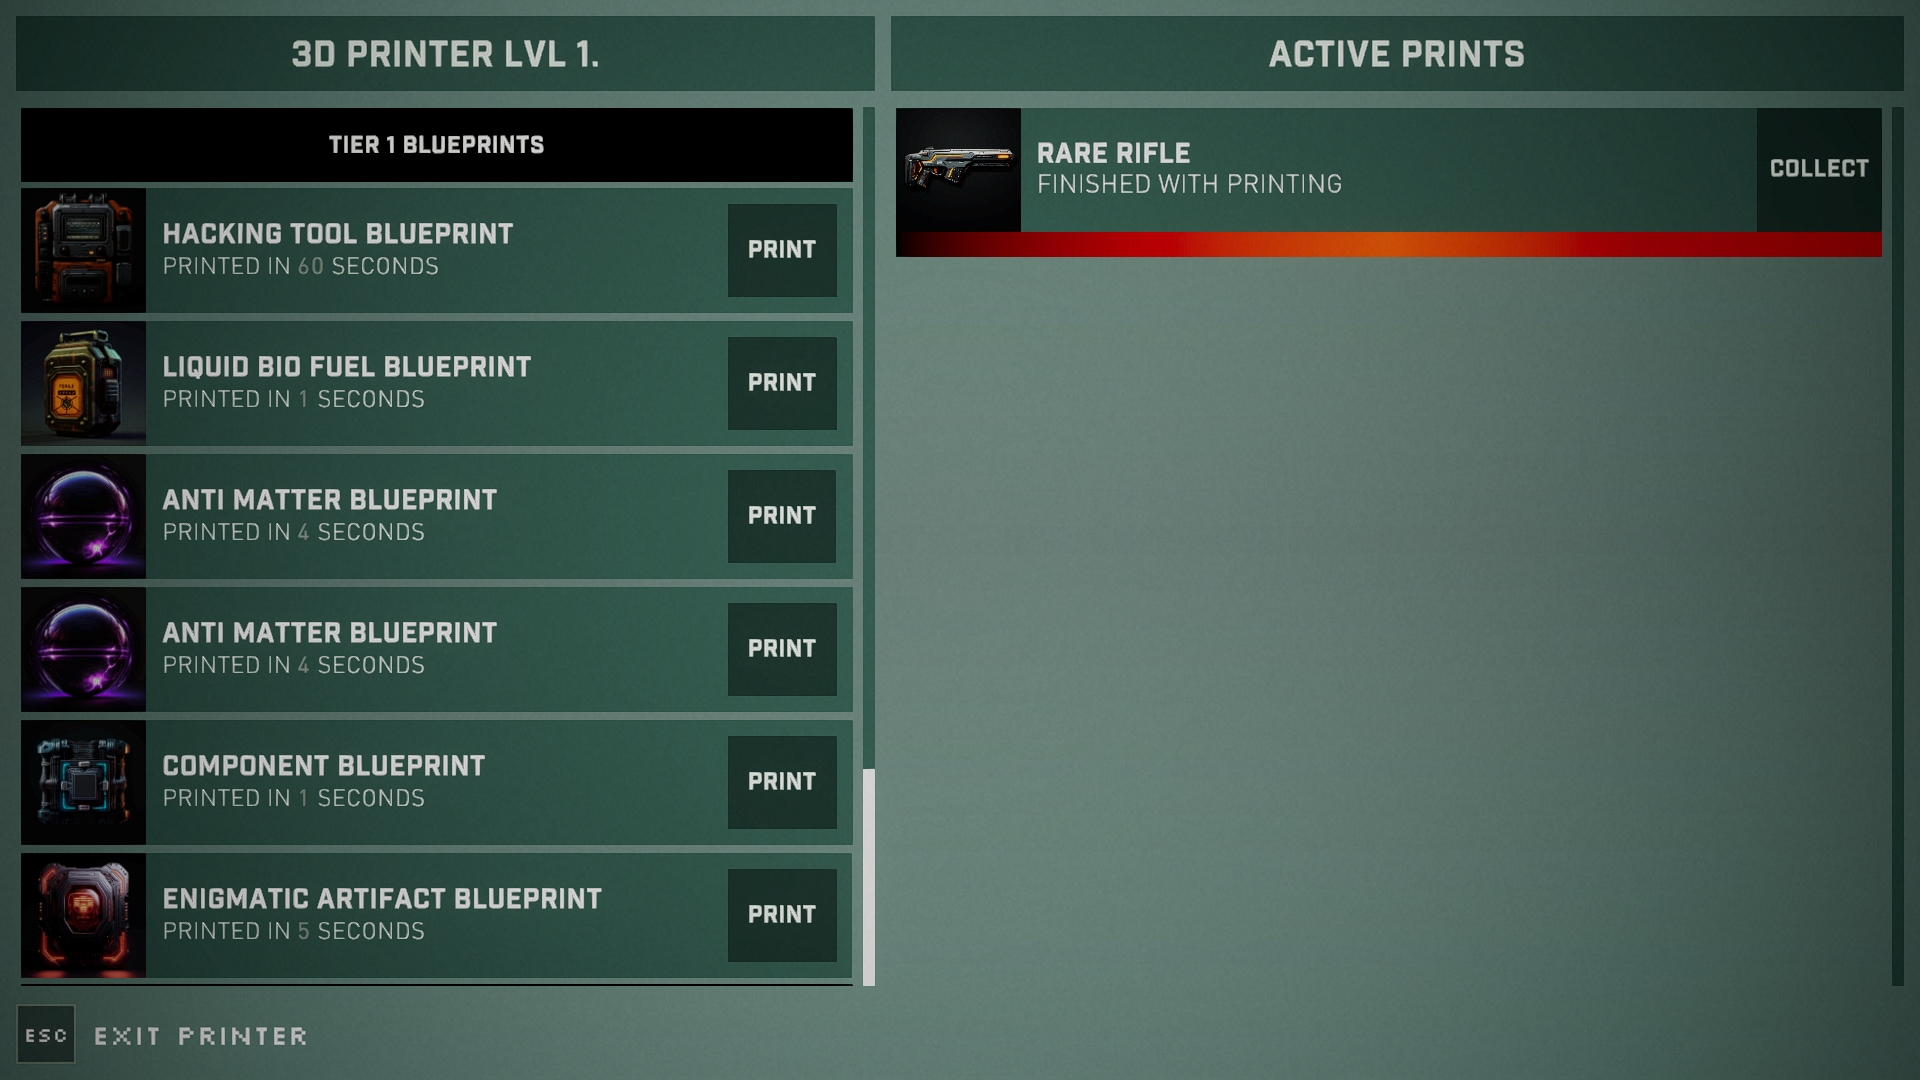 The new printer UI and blueprints